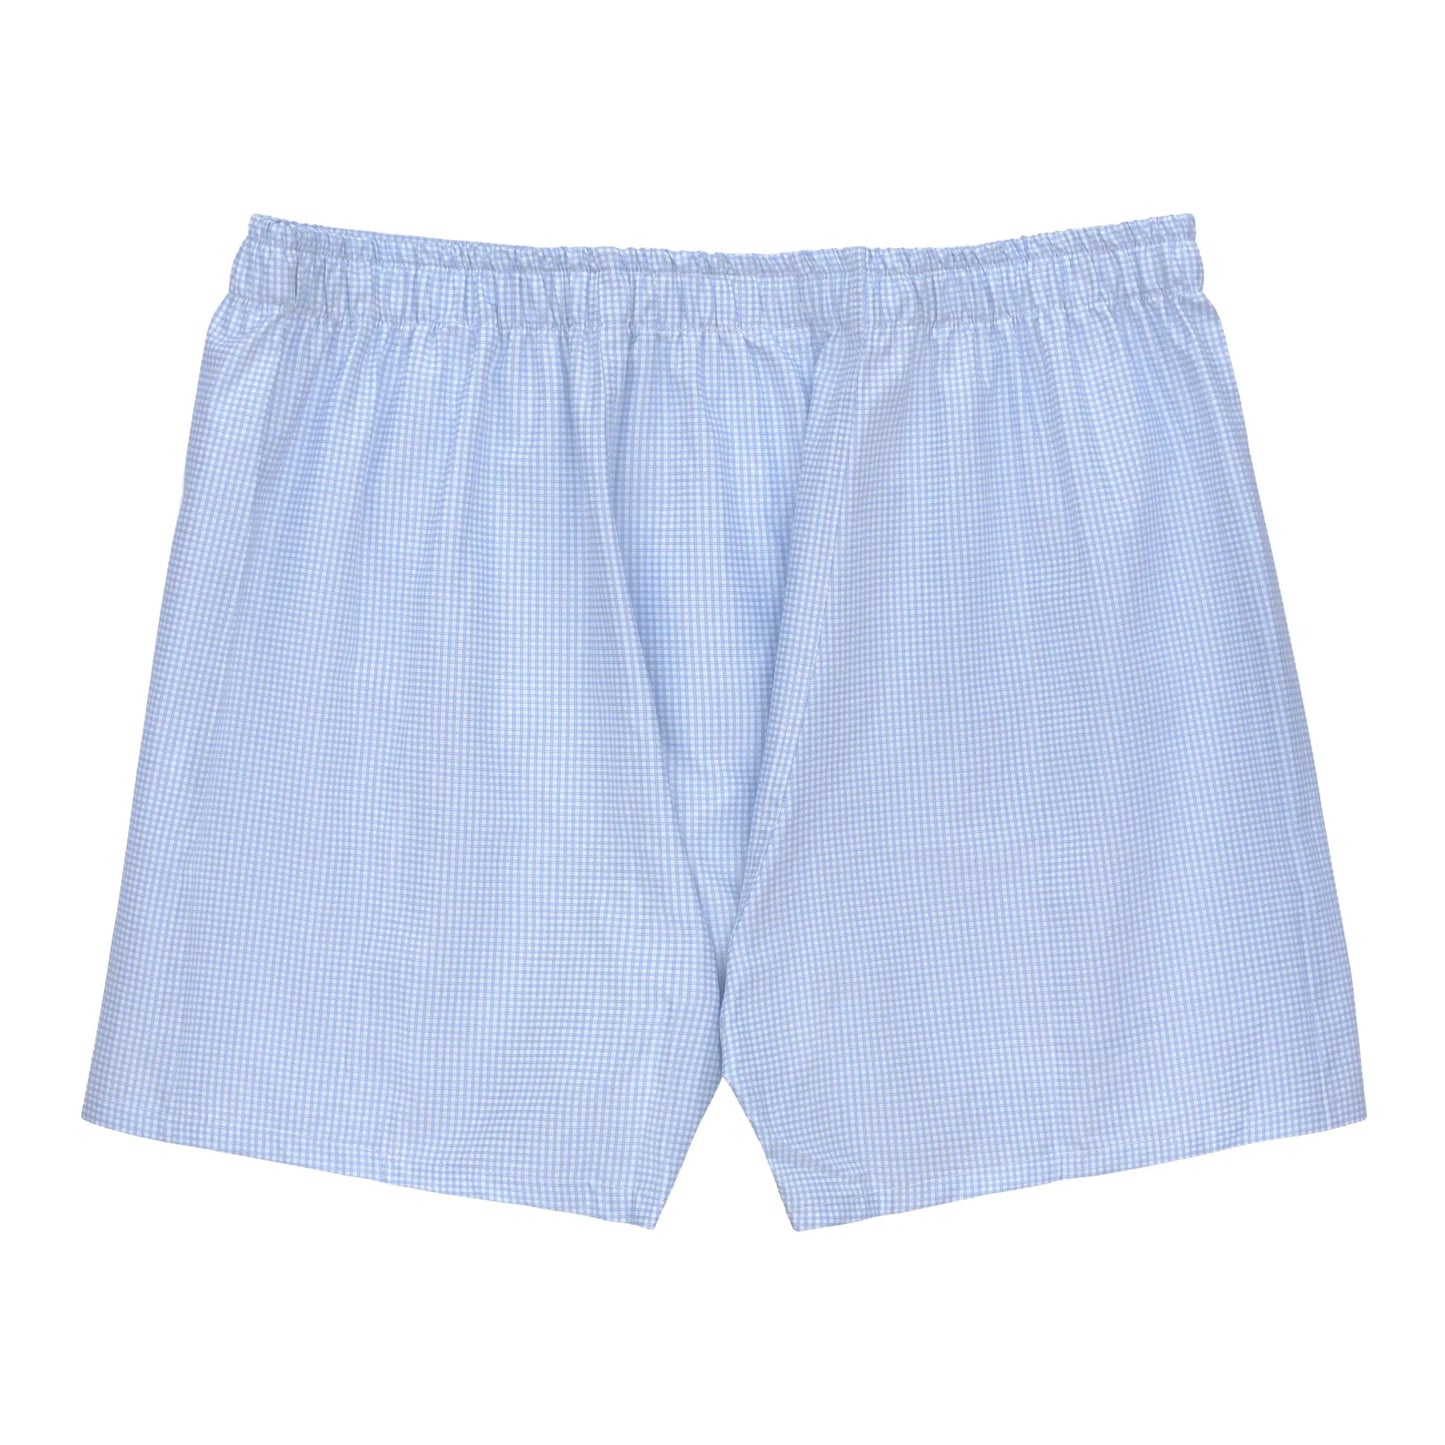 Emanuele Maffeis Checked Blue and White Boxer Shorts - SARTALE